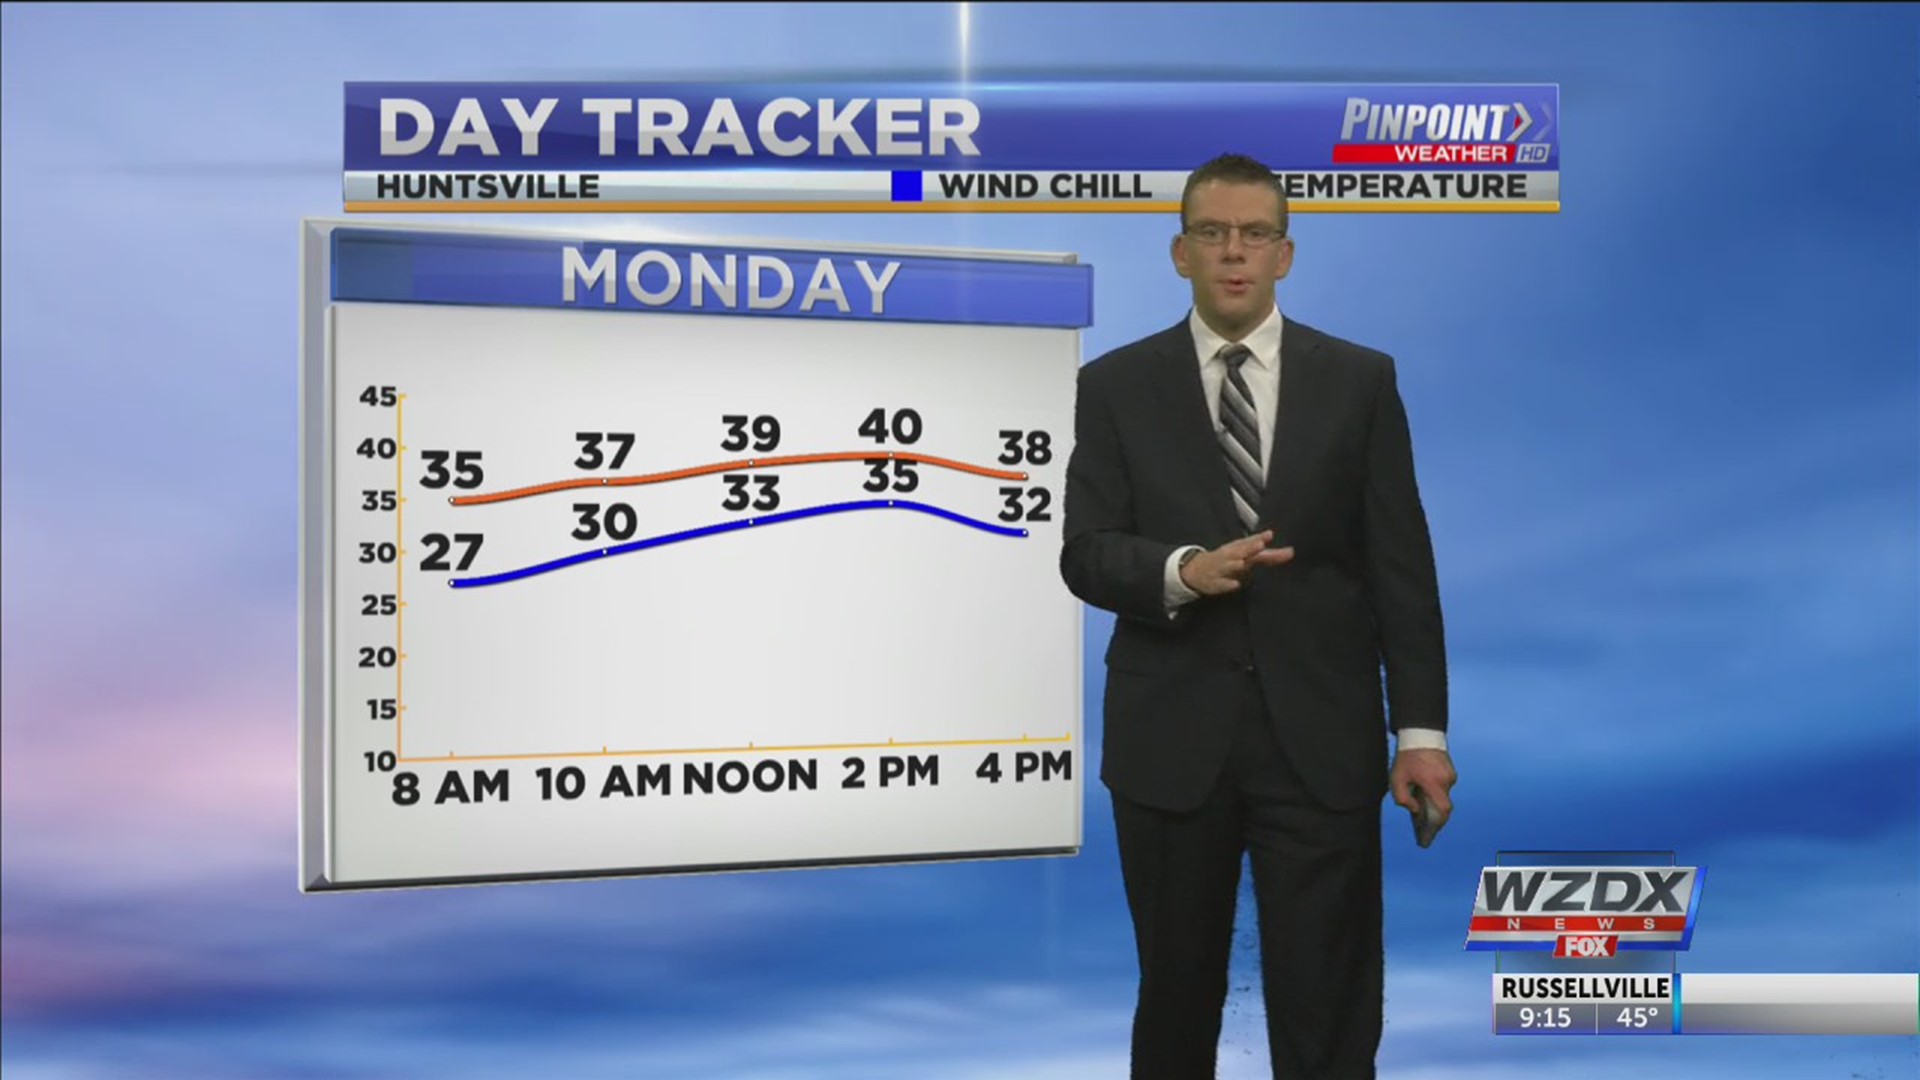 The wind continues tonight and Monday, making for a cold return to work and school. Details inside tonight's forecast.